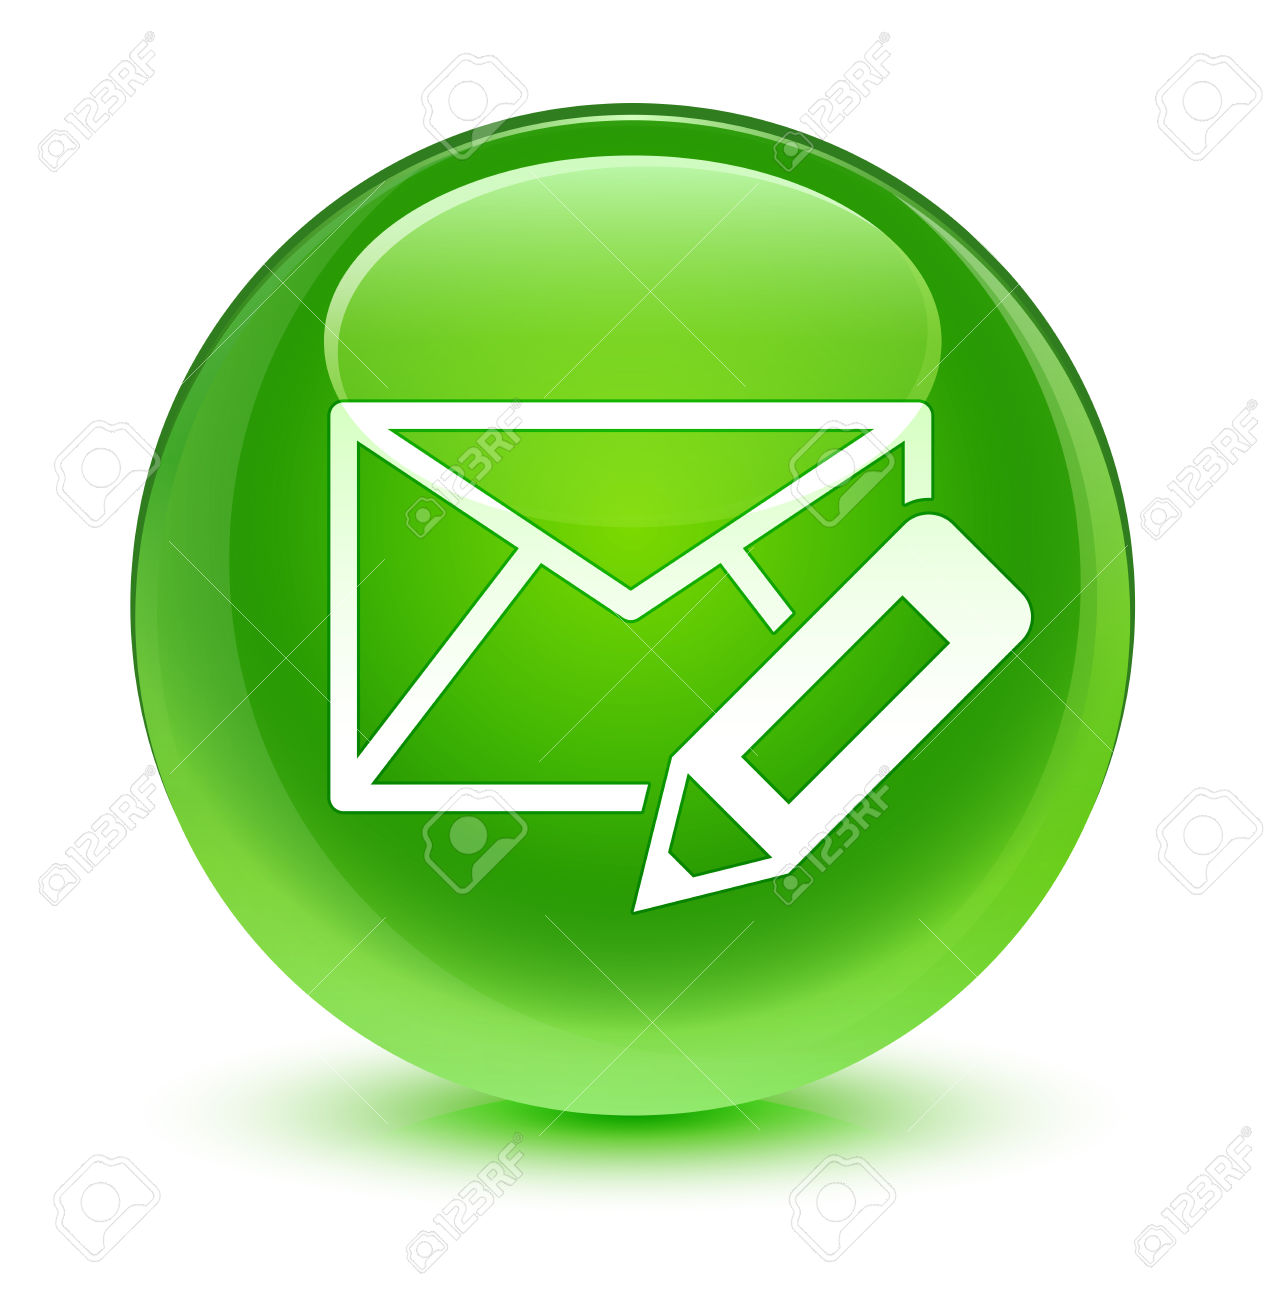 Edit email icon glassy green button